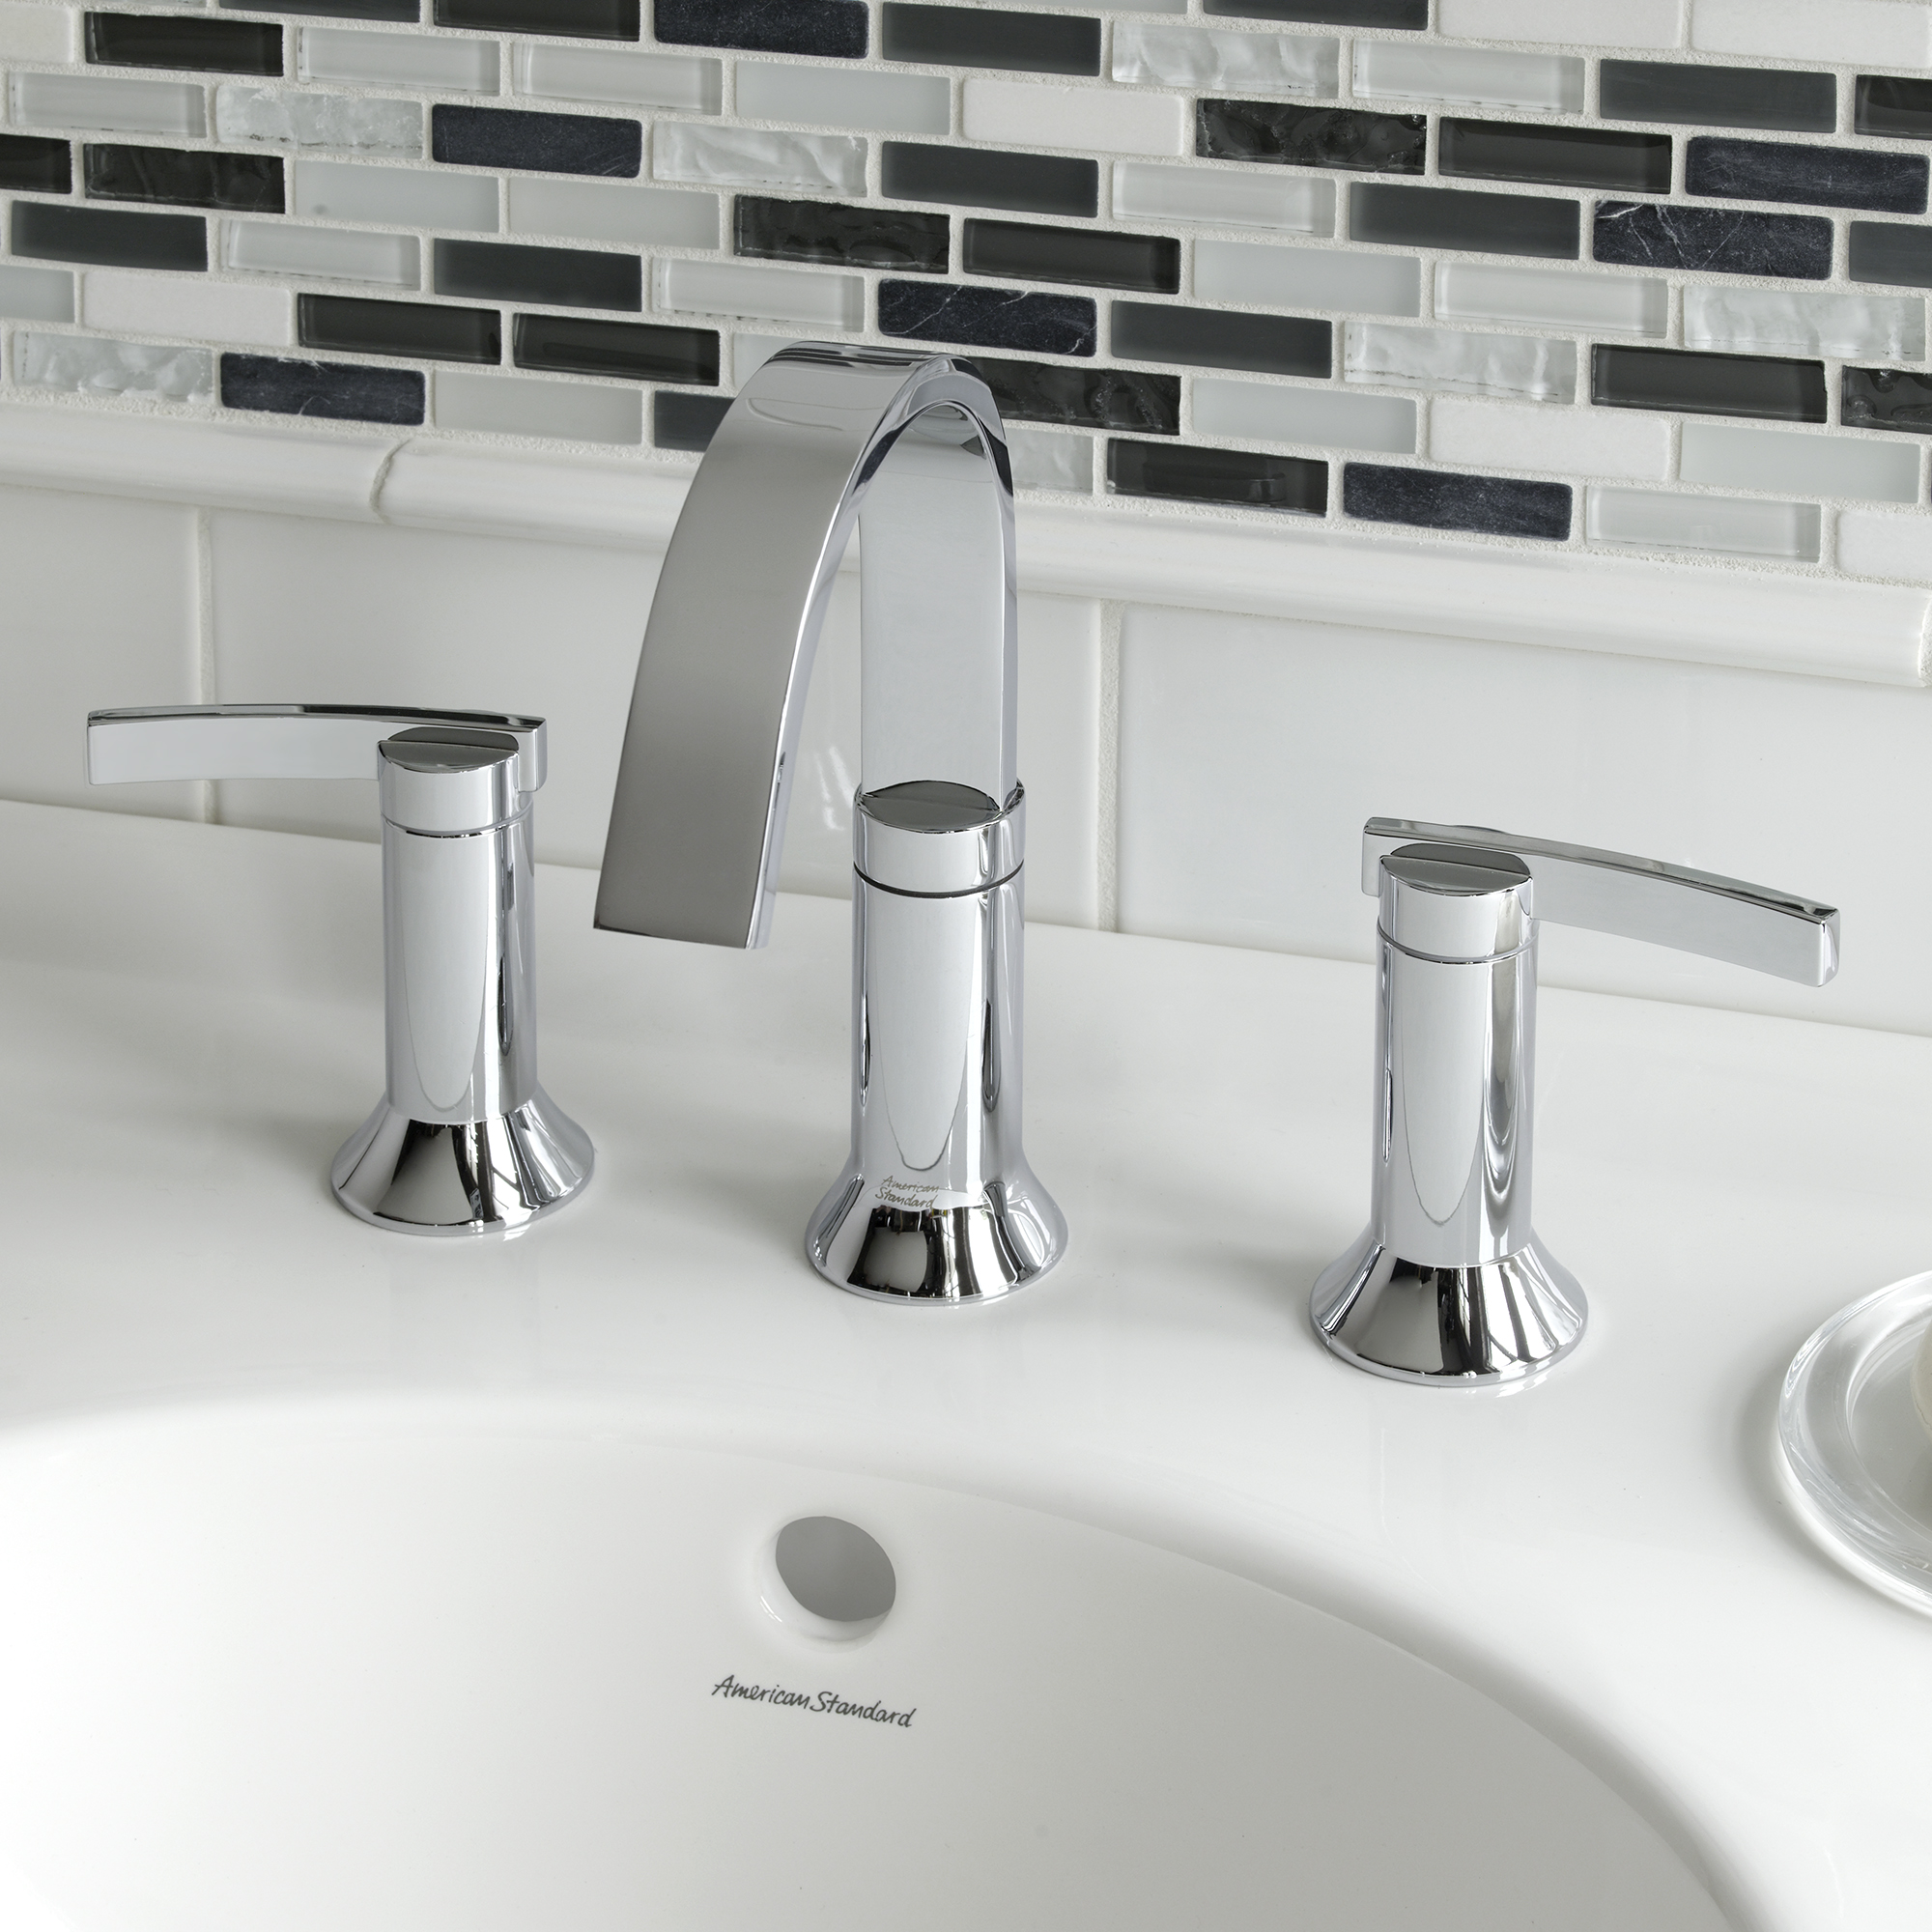 Berwick® 8-Inch Widespread 2-Handle Bathroom Faucet 1.2 gpm/4.5 L/min With Lever Handles